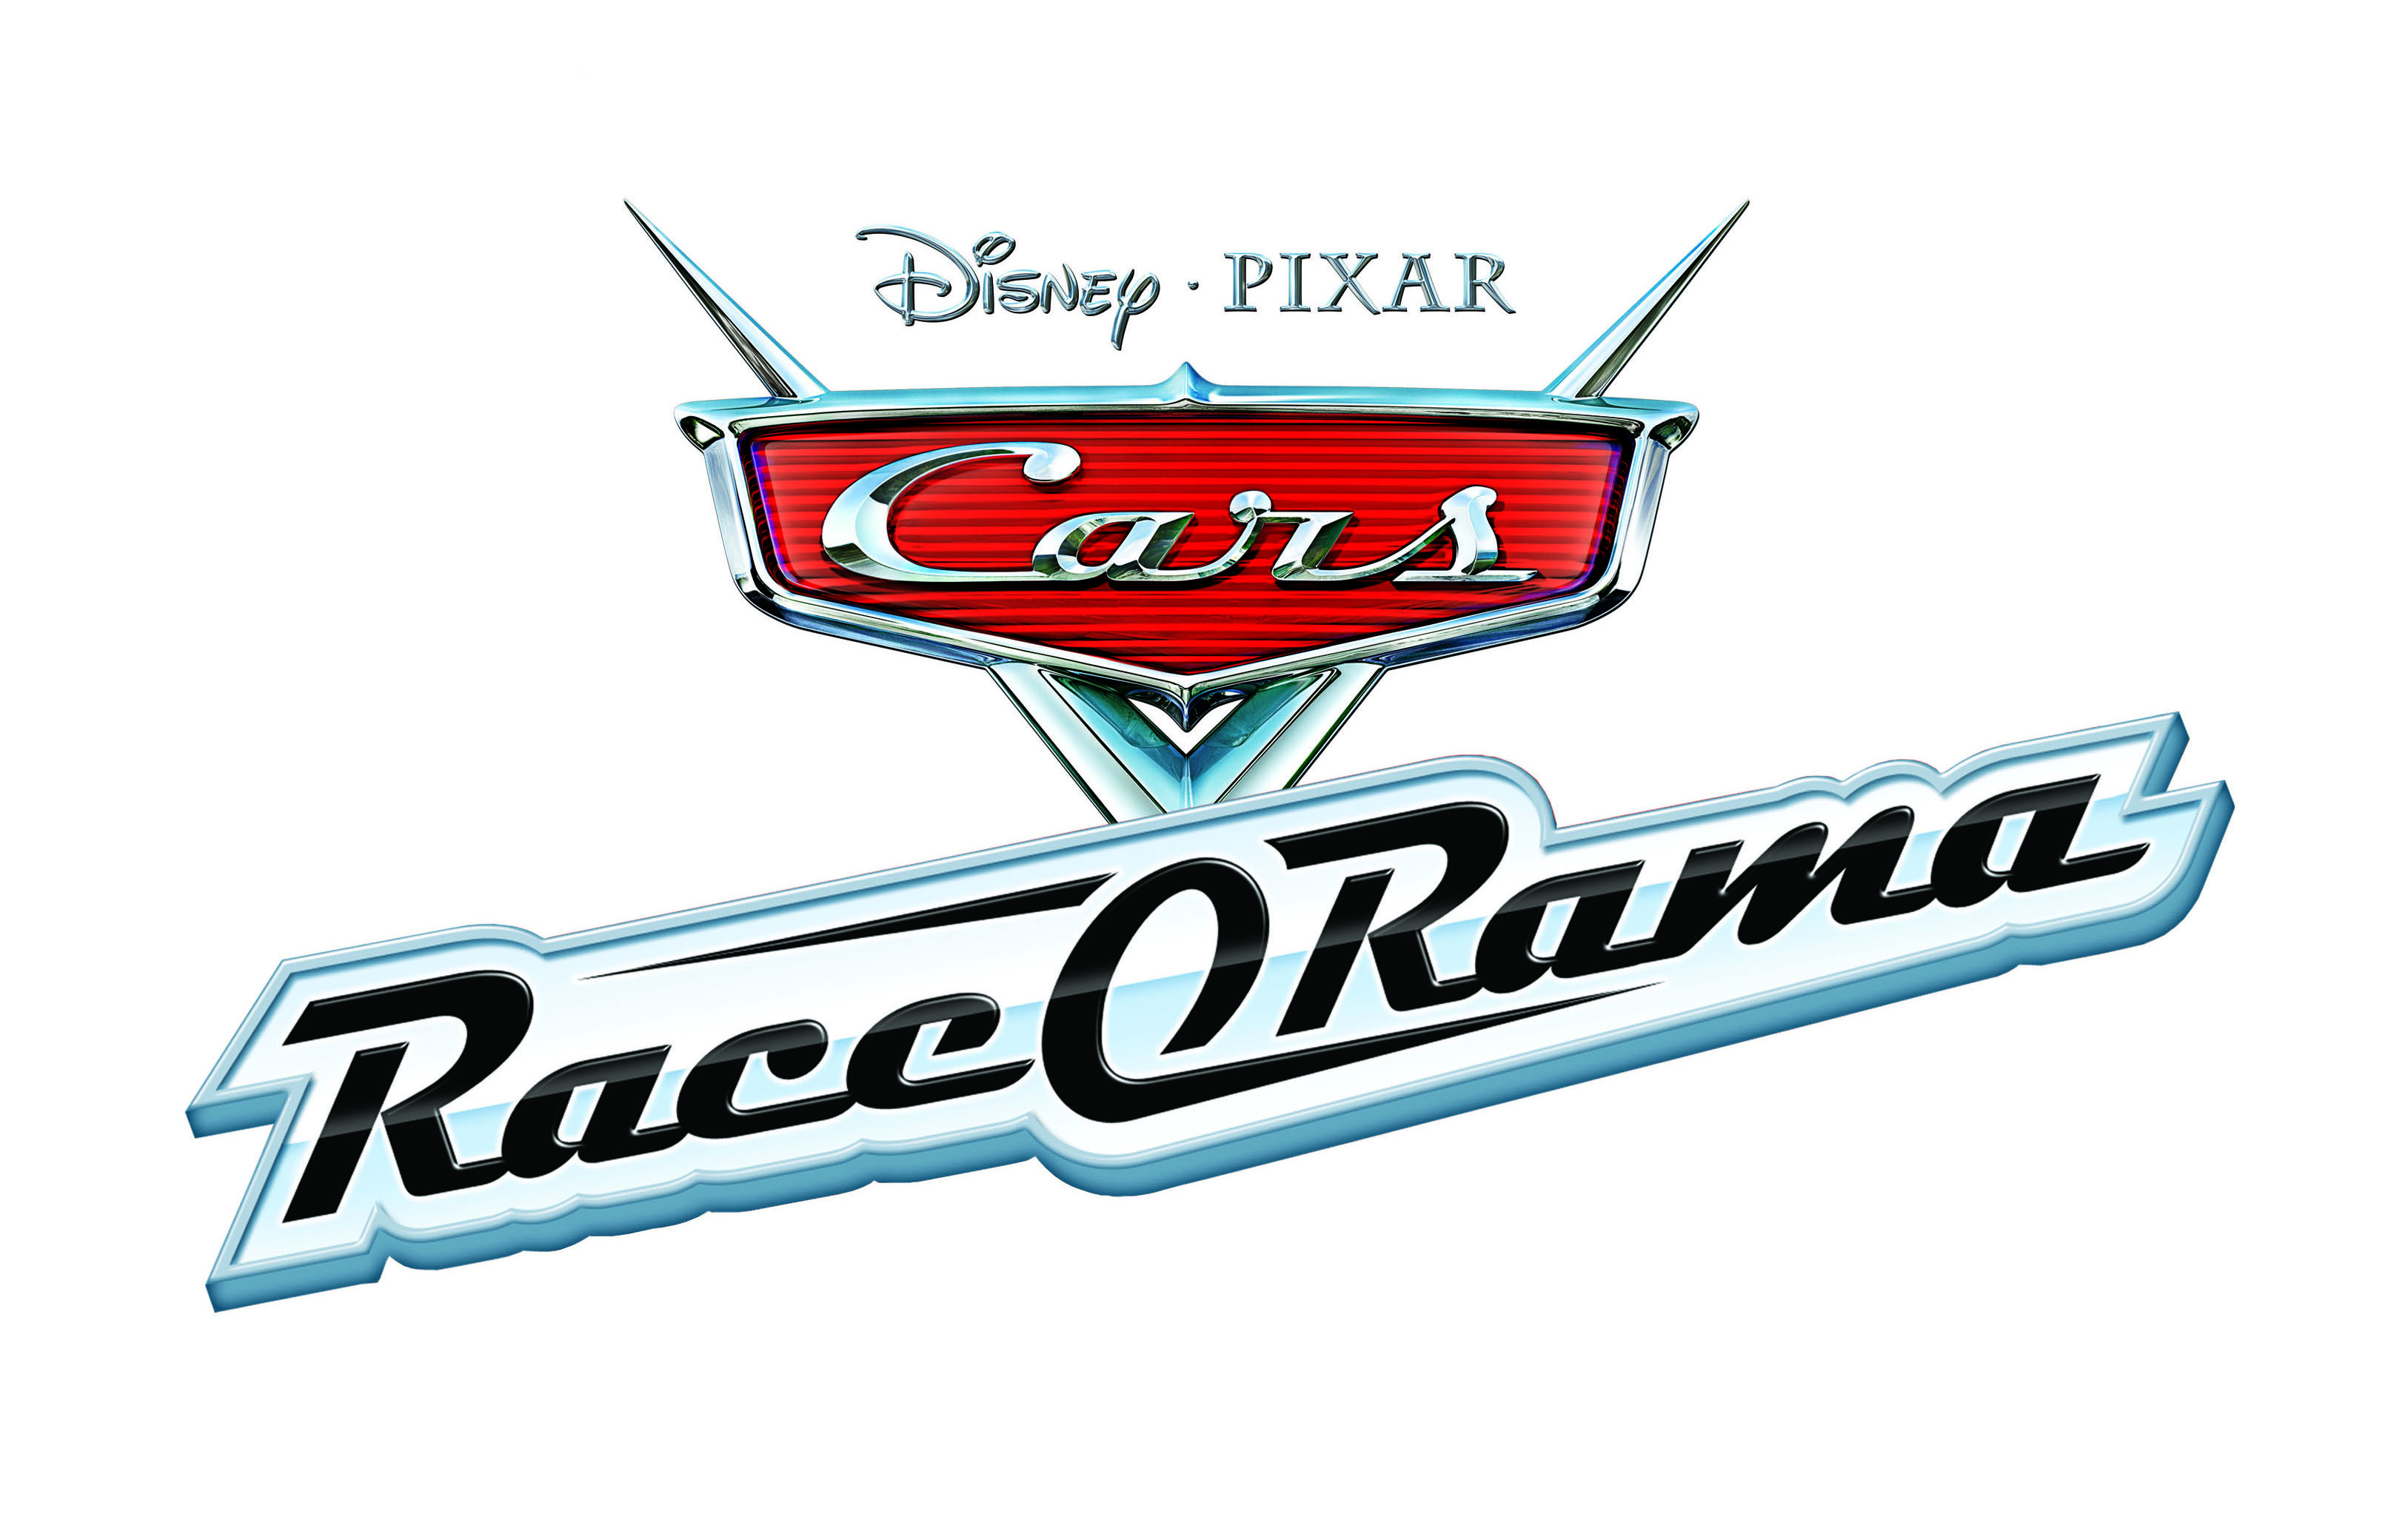 Cars Race-O-Rama (2009) by Incinerator Games PSP game